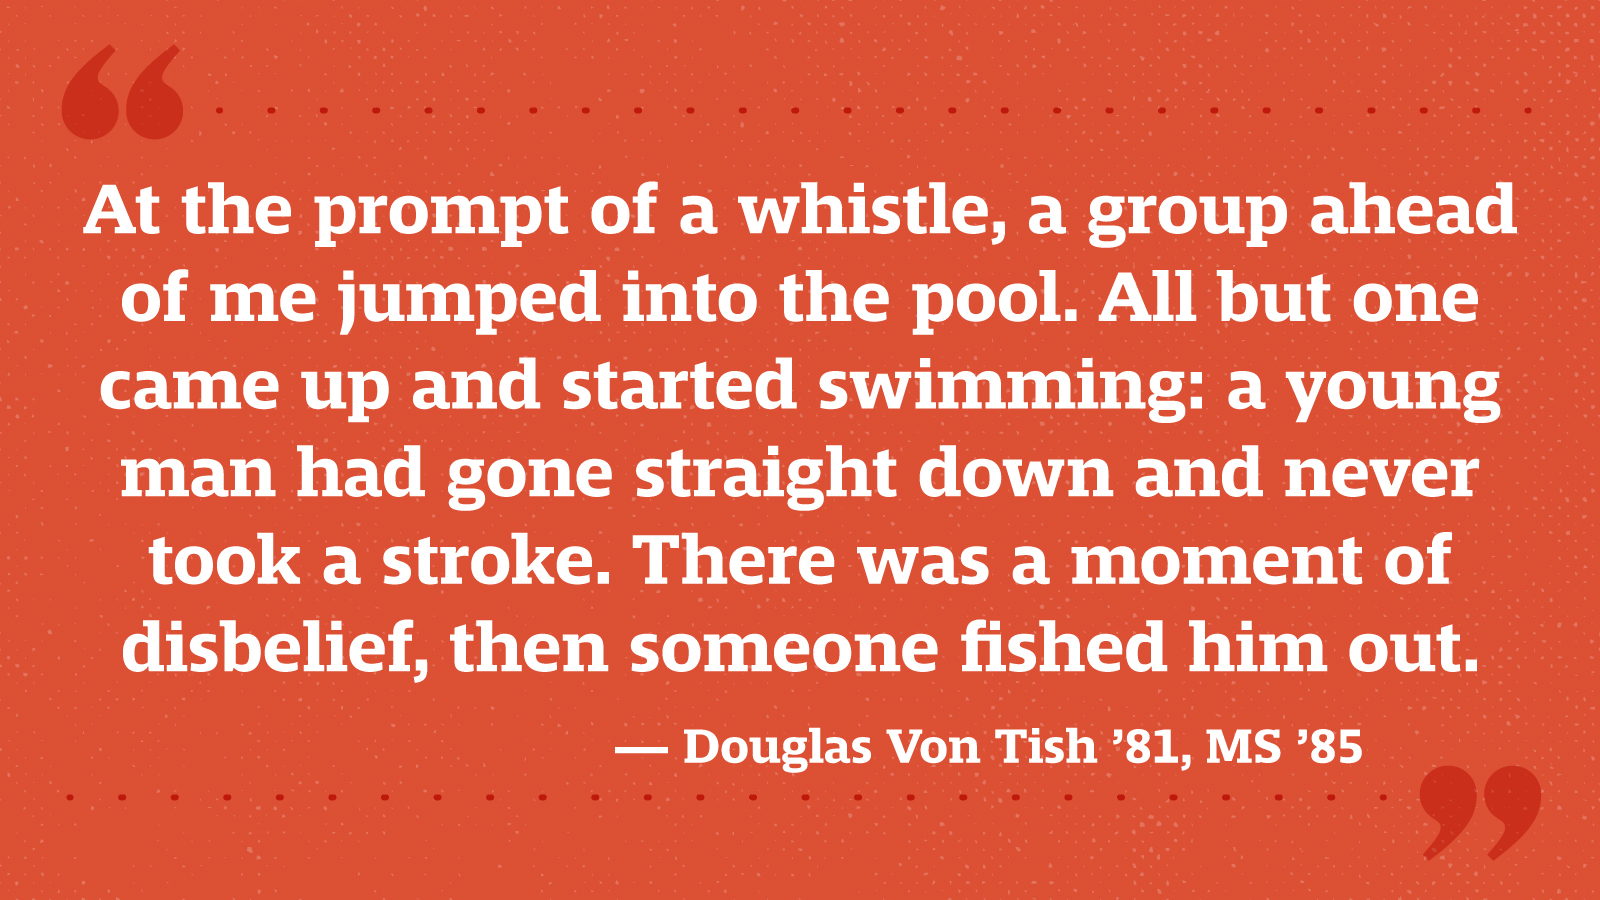 At the prompt of a whistle, a group ahead of me jumped into the pool. All but one came up and started swimming: a young man had gone straight down and never took a stroke. There was a moment of disbelief, then someone fished him out. — Douglas Von Tish ’81, MS ’85